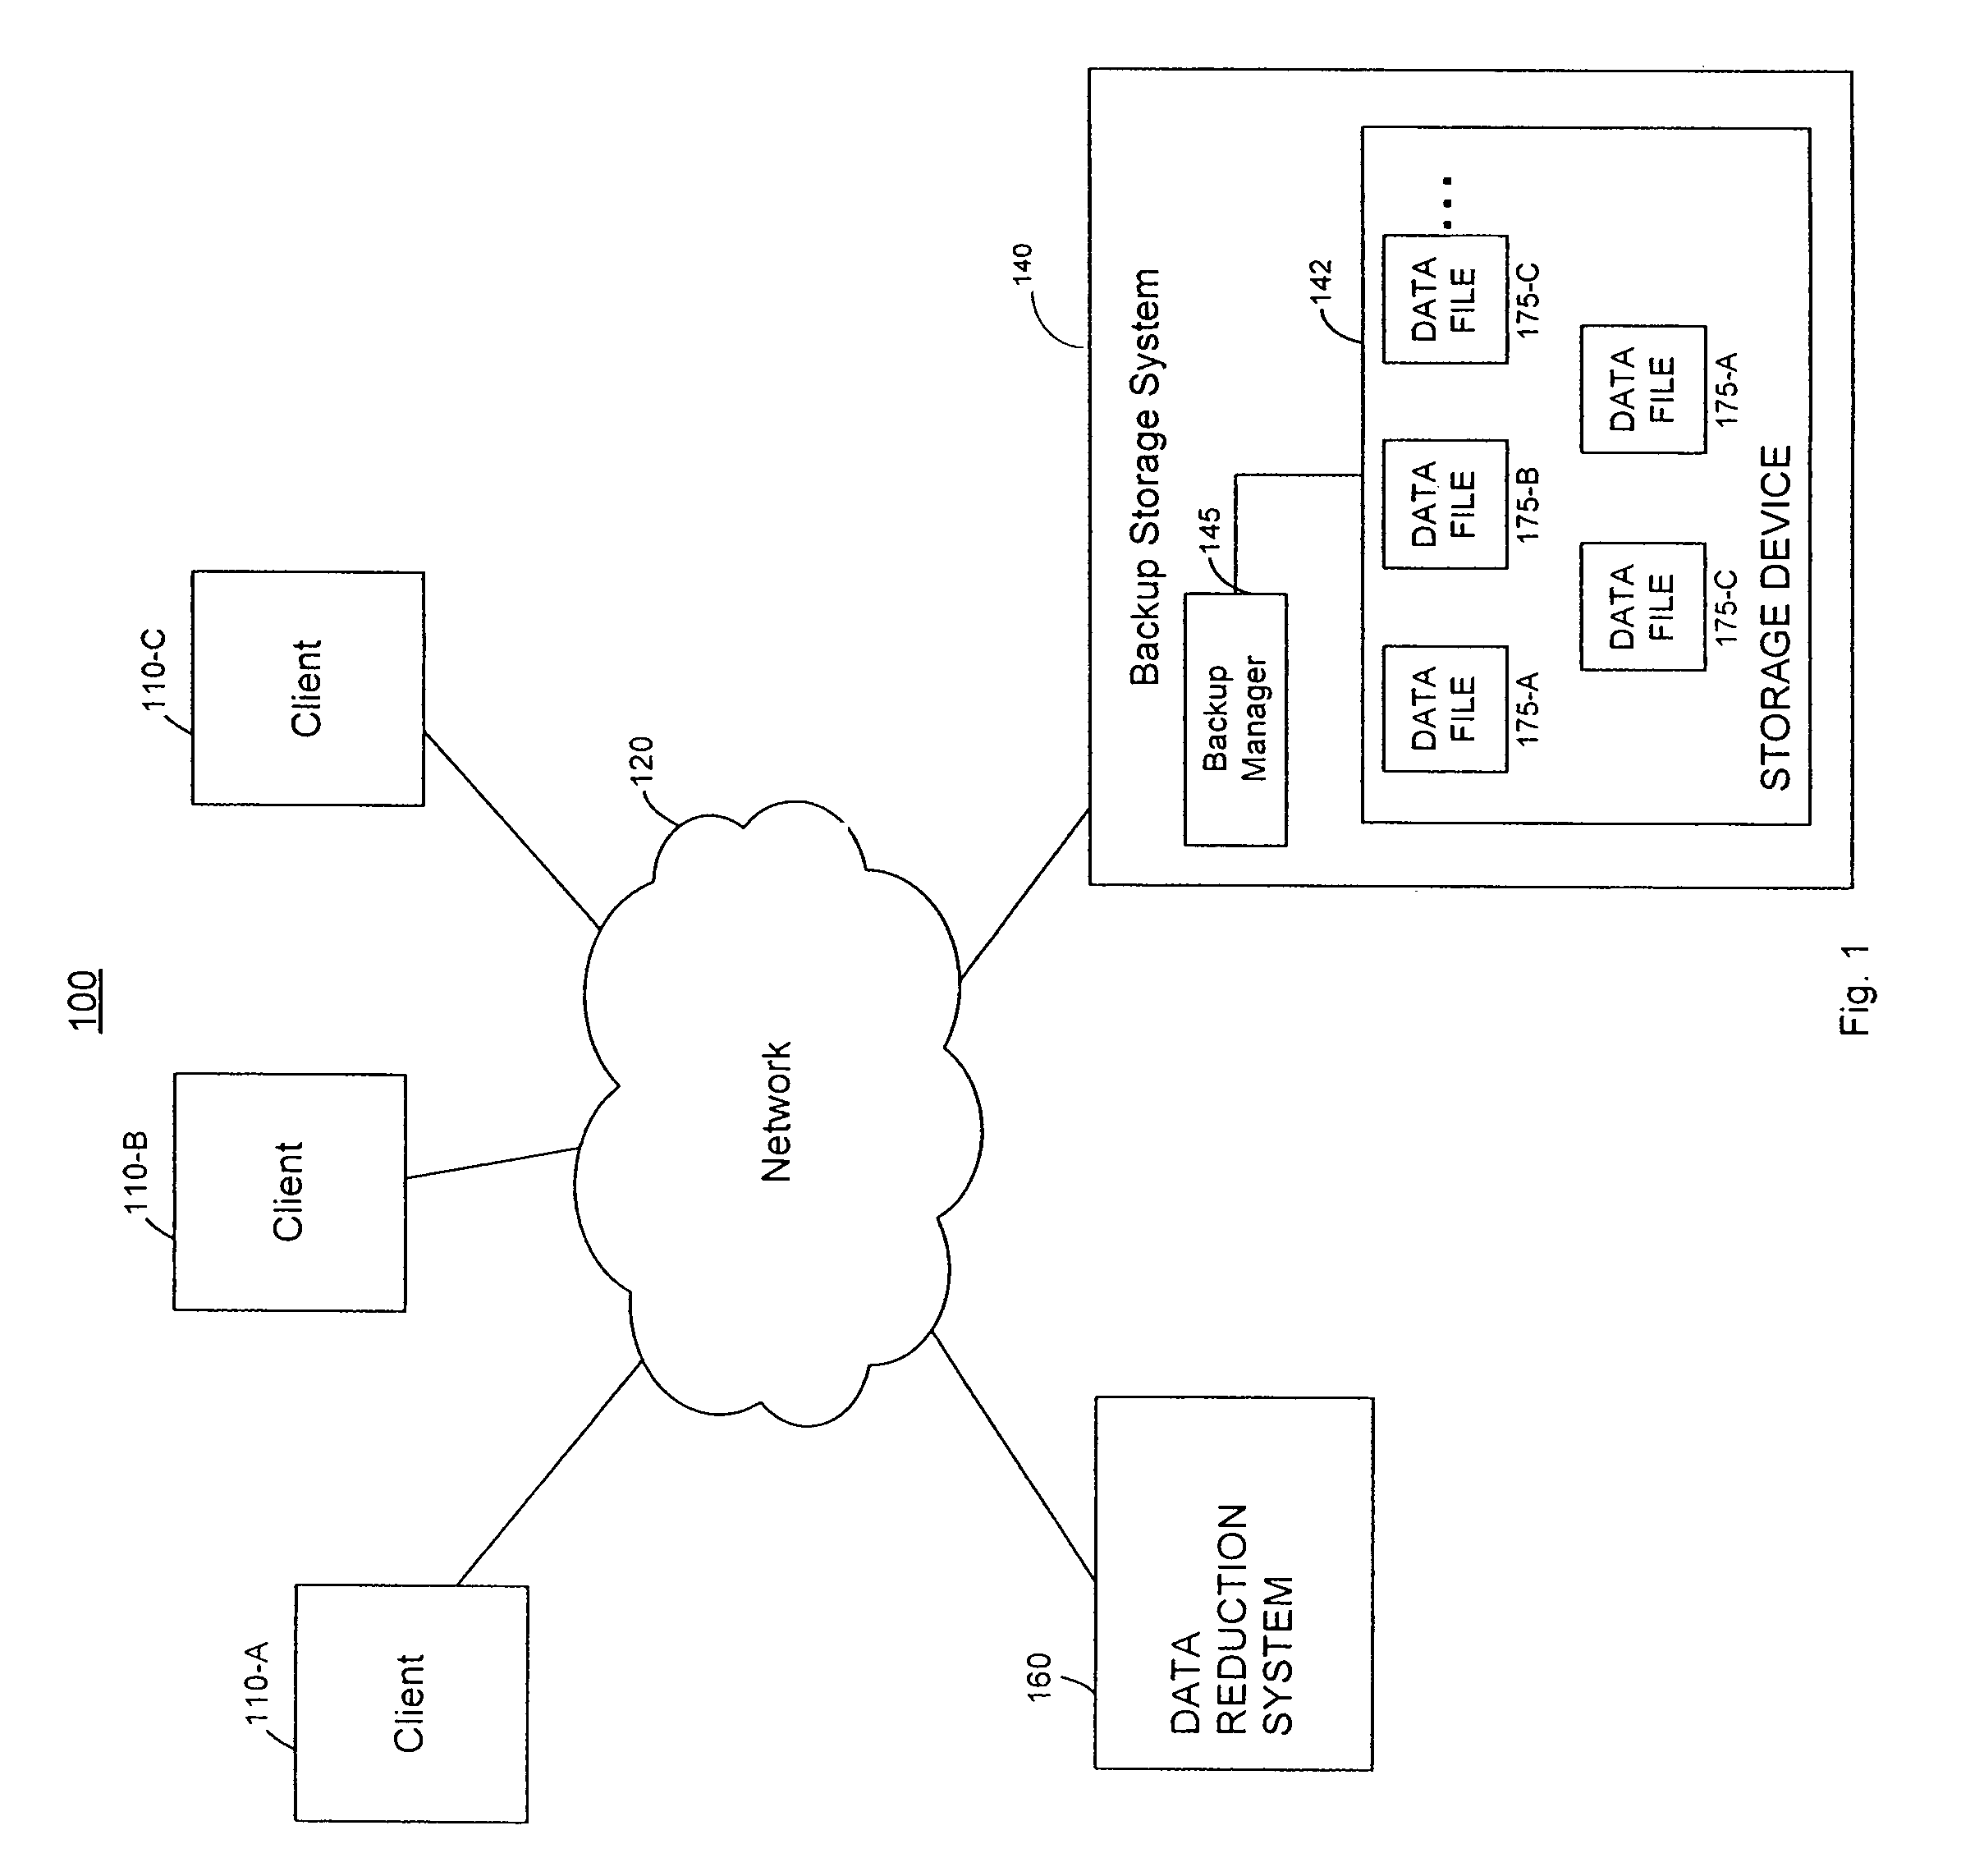 System and method for identifying and mitigating redundancies in stored data